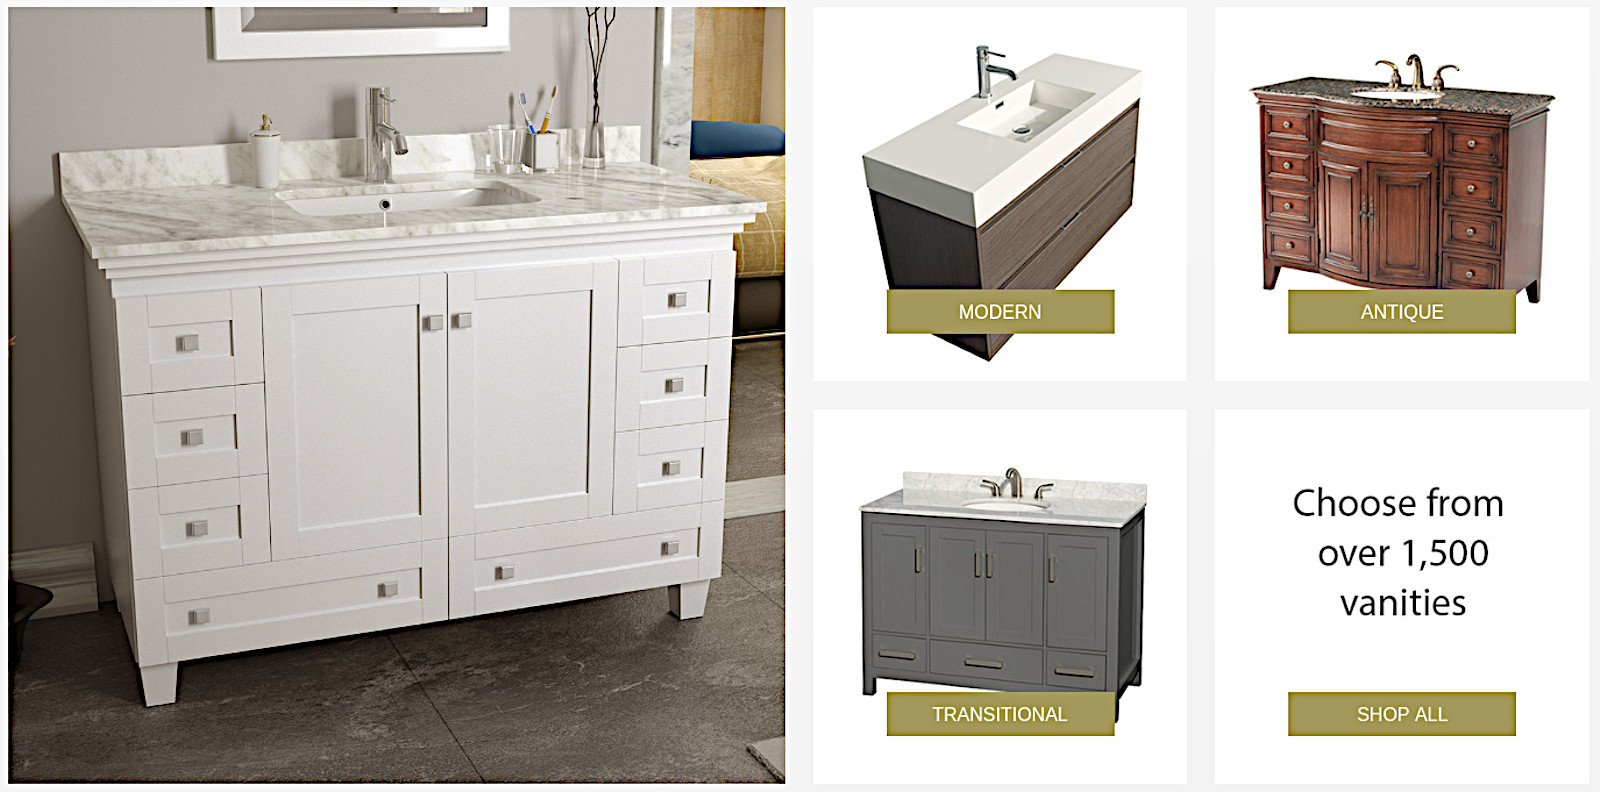 At A Discount modern antique transitional vanities